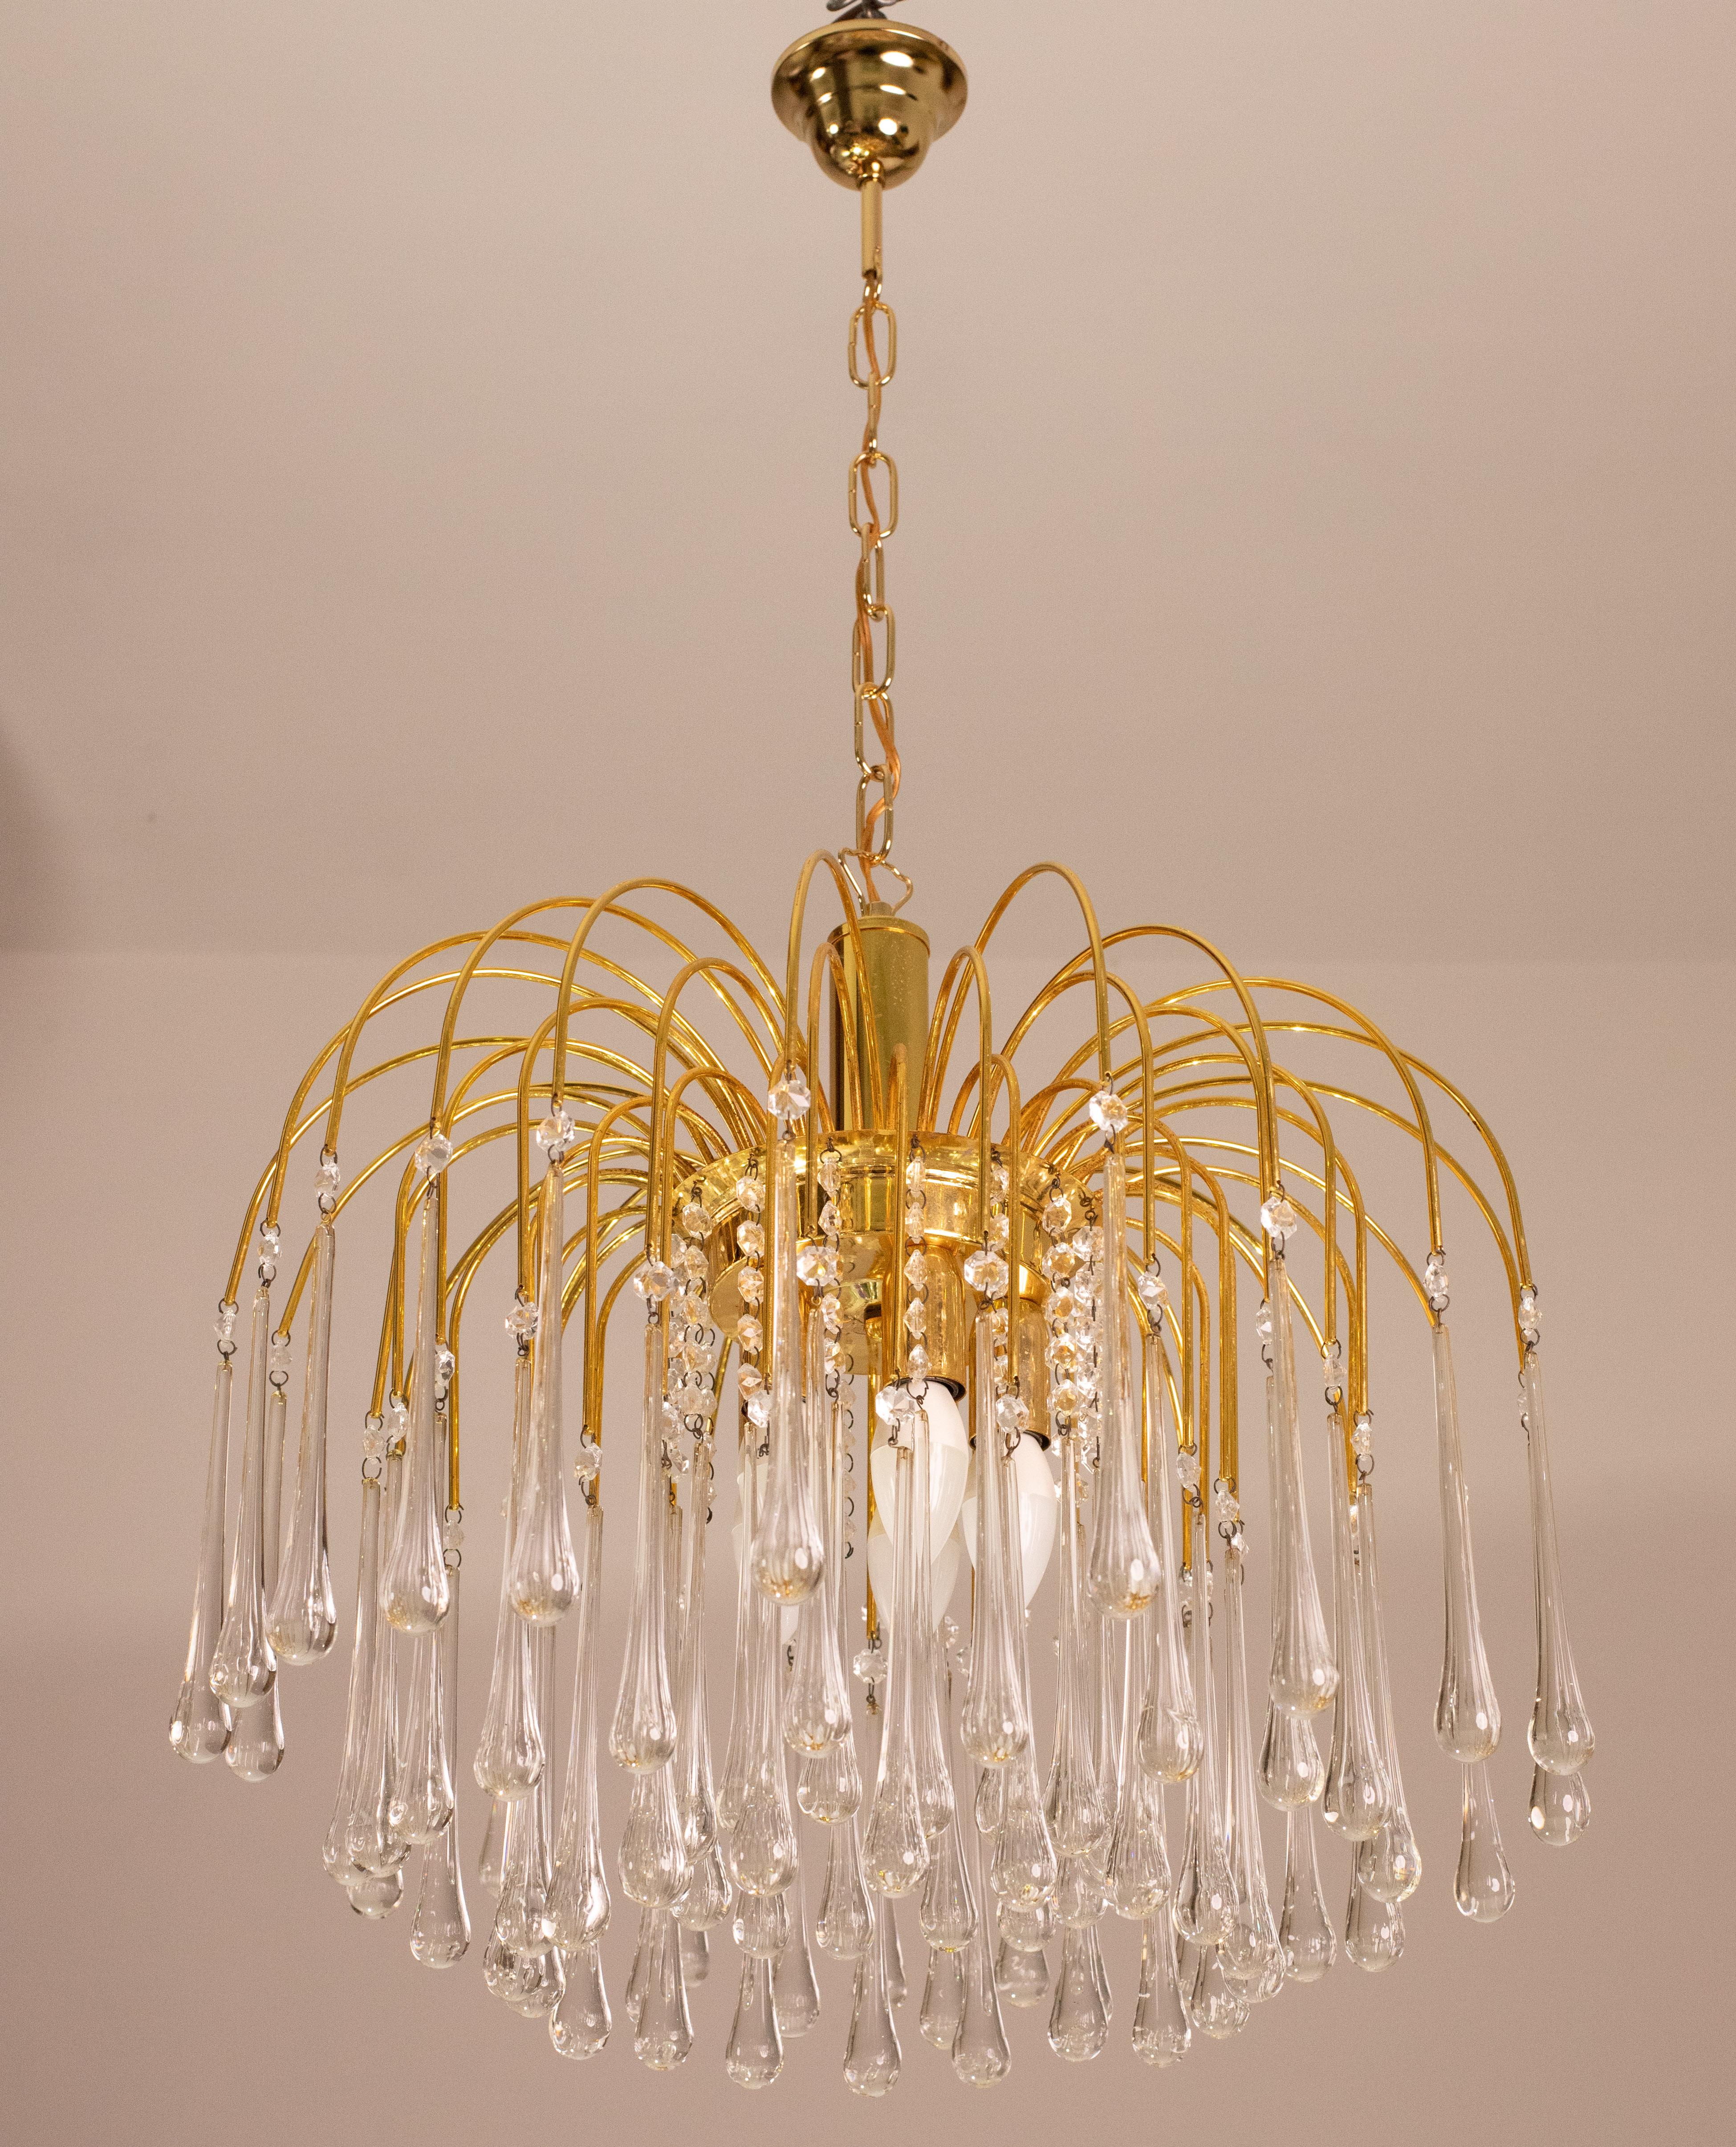 Gorgeous and unique pair of Murano chandeliers in the style of Venini La Cascata.
The structures are in good aesthetic condition.
The chandeliers consist of four rounds composed of beautiful white drops cascading down and alternating with beads.
The